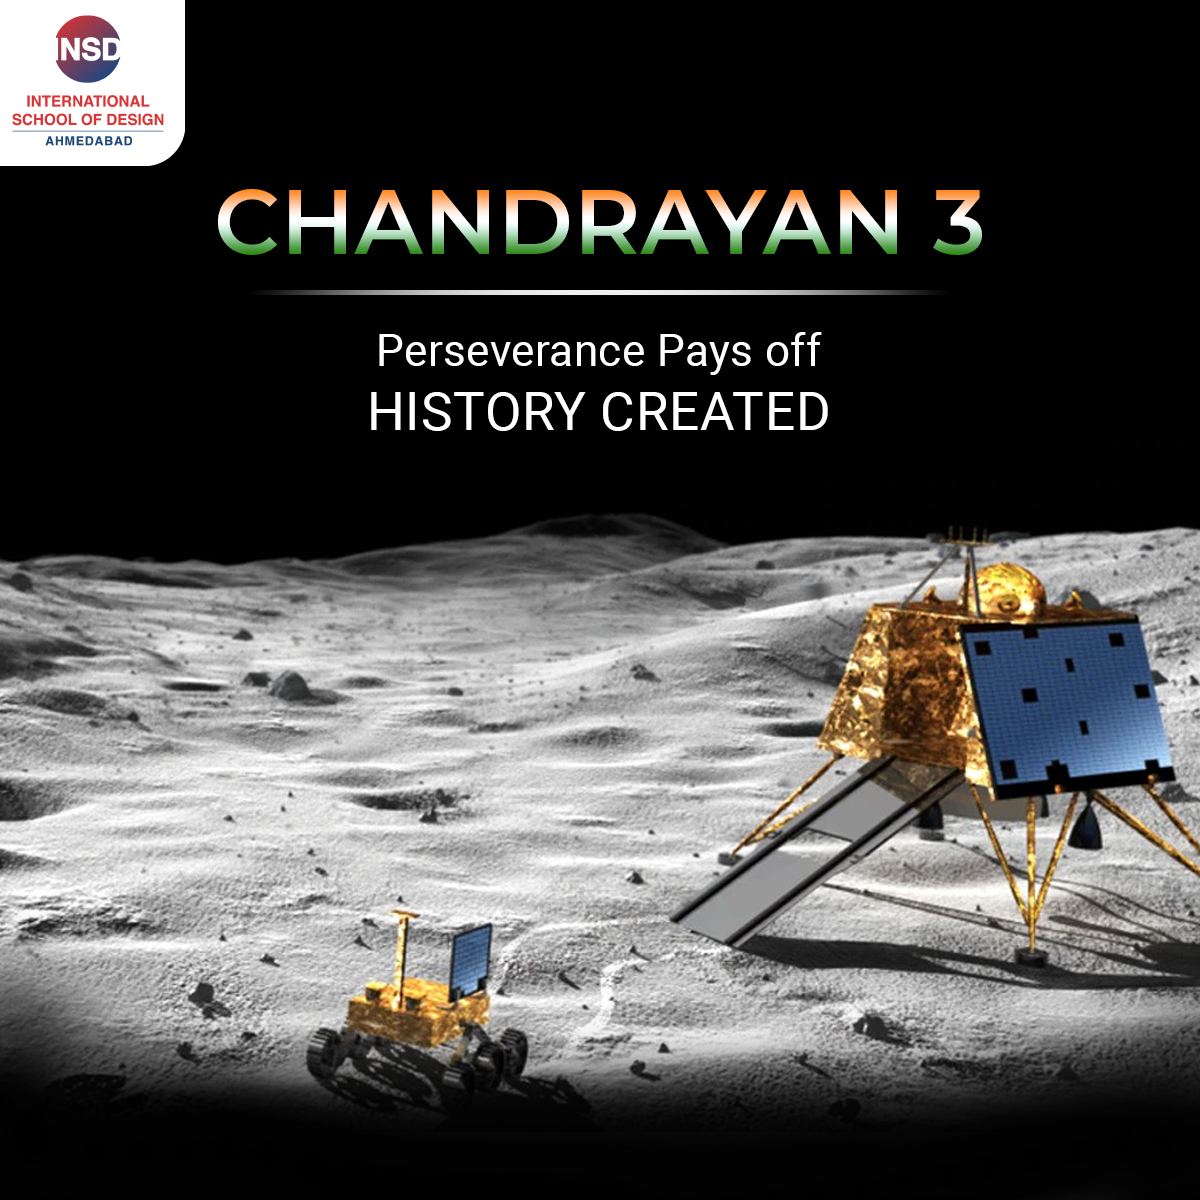 🌕 Celebrating a remarkable achievement! 🚀 ISRO's relentless dedication and hard work have paid off with the successful landing of their moon rover through Project Chandrayan 3. 🛰️ Let's applaud their unwavering perseverance and the spirit of exploration! 🌠 #ISRO #Chandrayan3